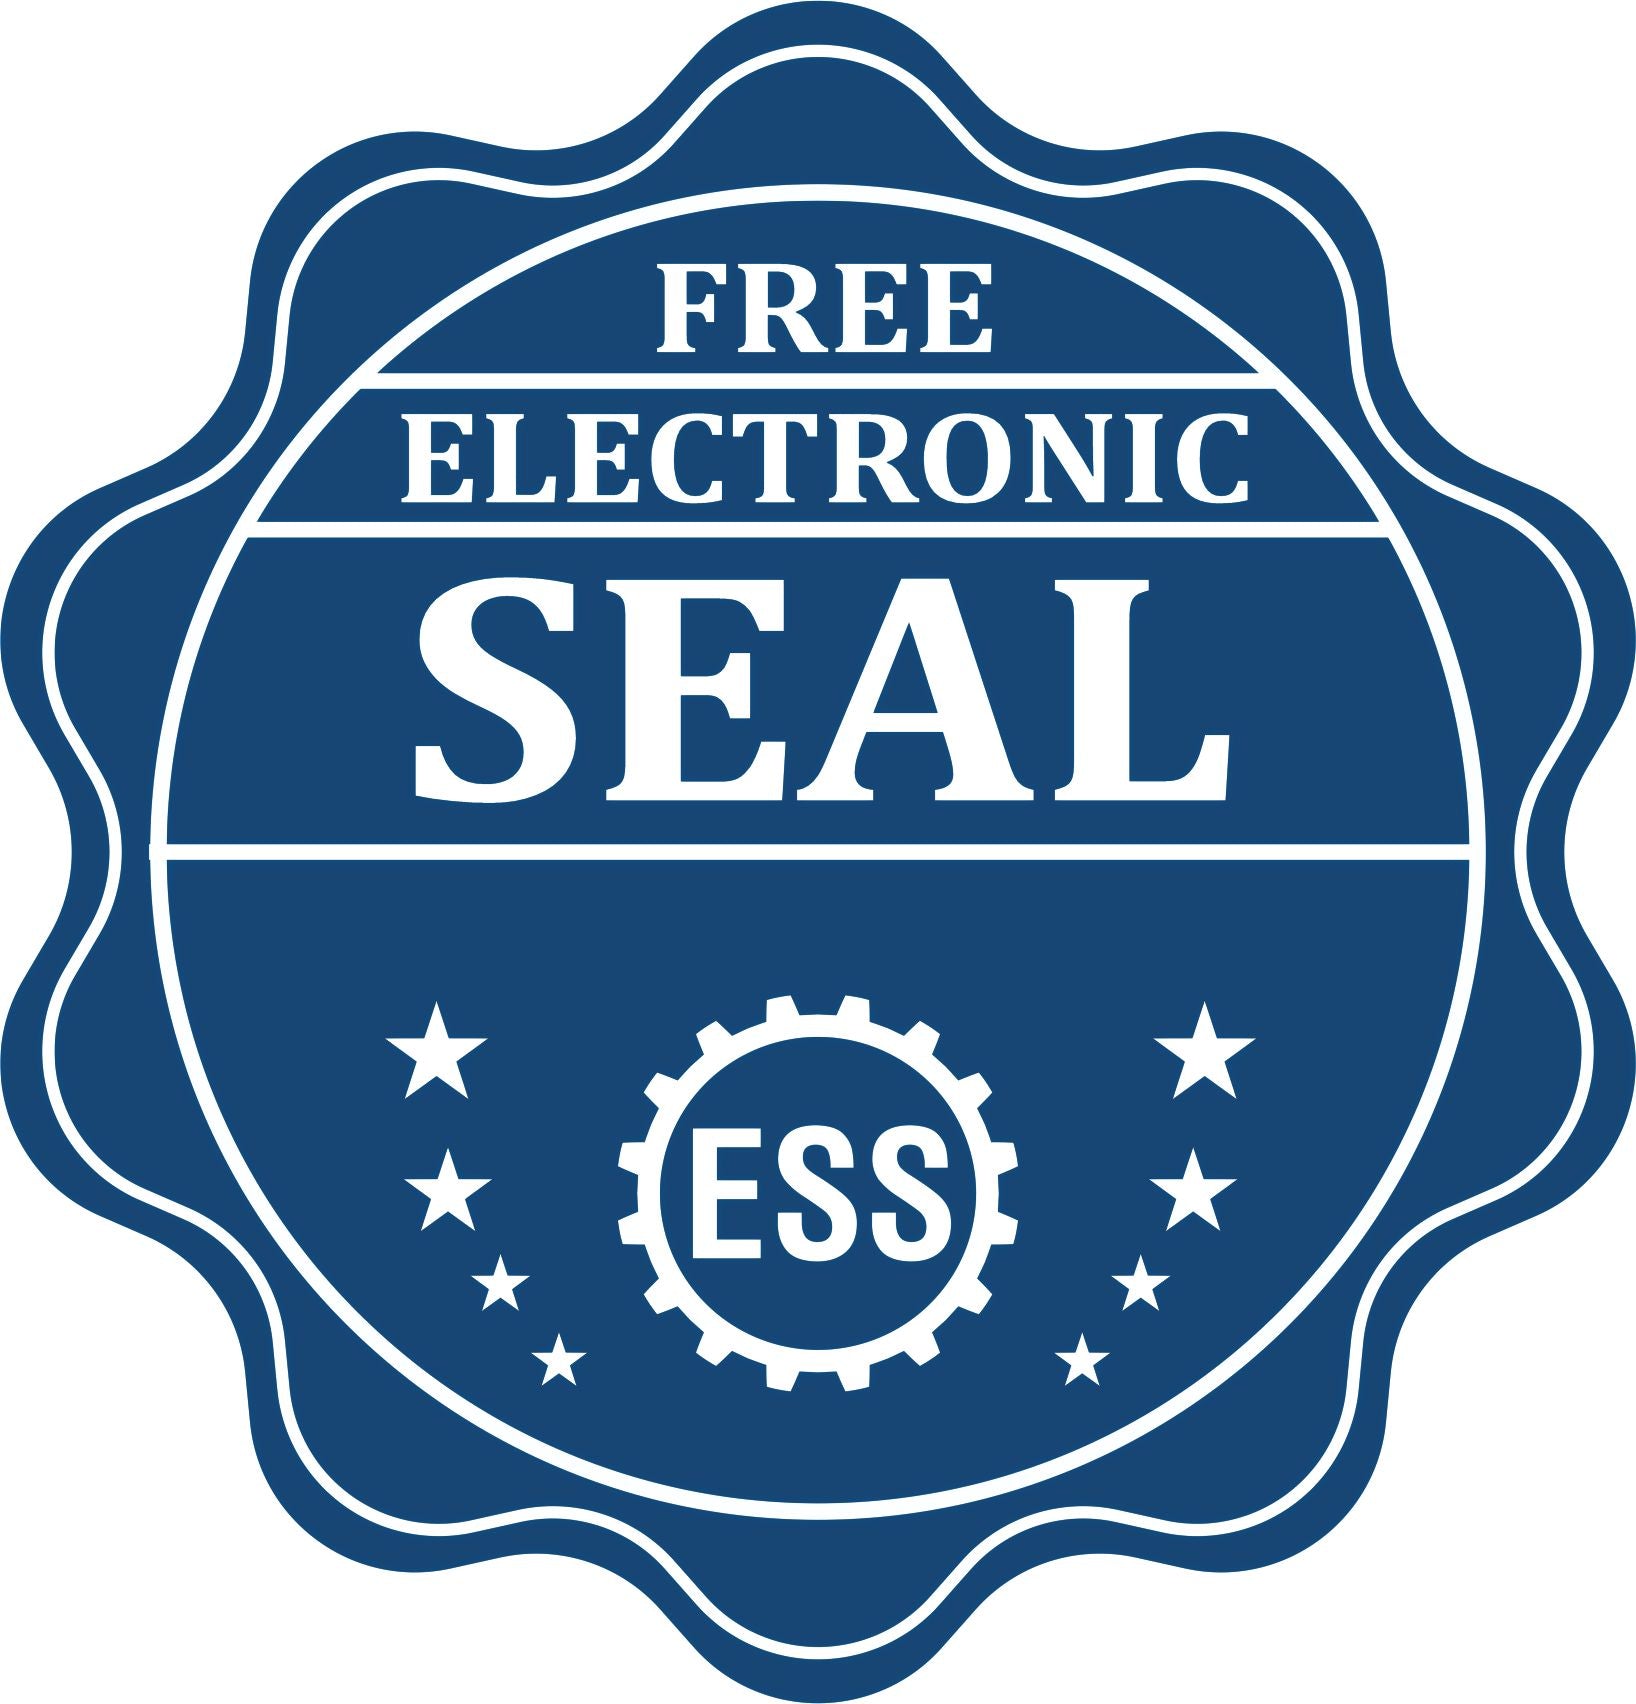 A badge showing a free electronic seal for the Extended Long Reach Georgia Surveyor Embosser with stars and the ESS gear on the emblem.